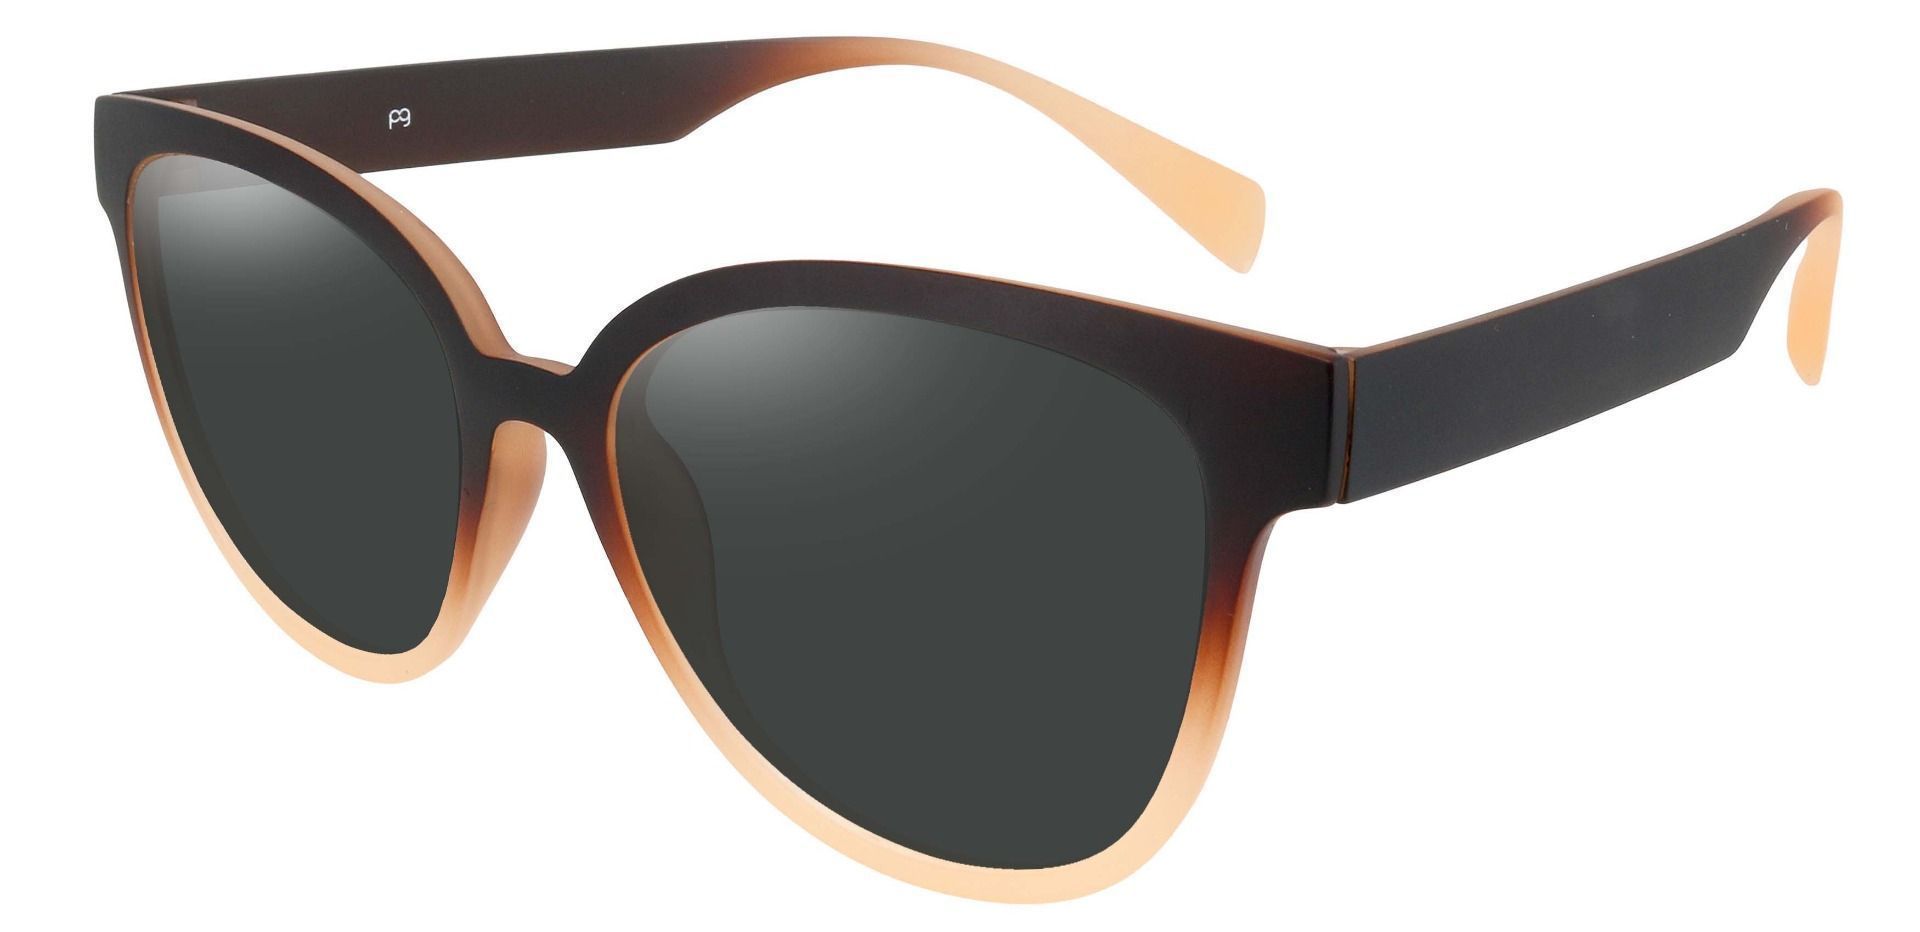 Newport Oval Non-Rx Sunglasses - Brown Frame With Gray Lenses